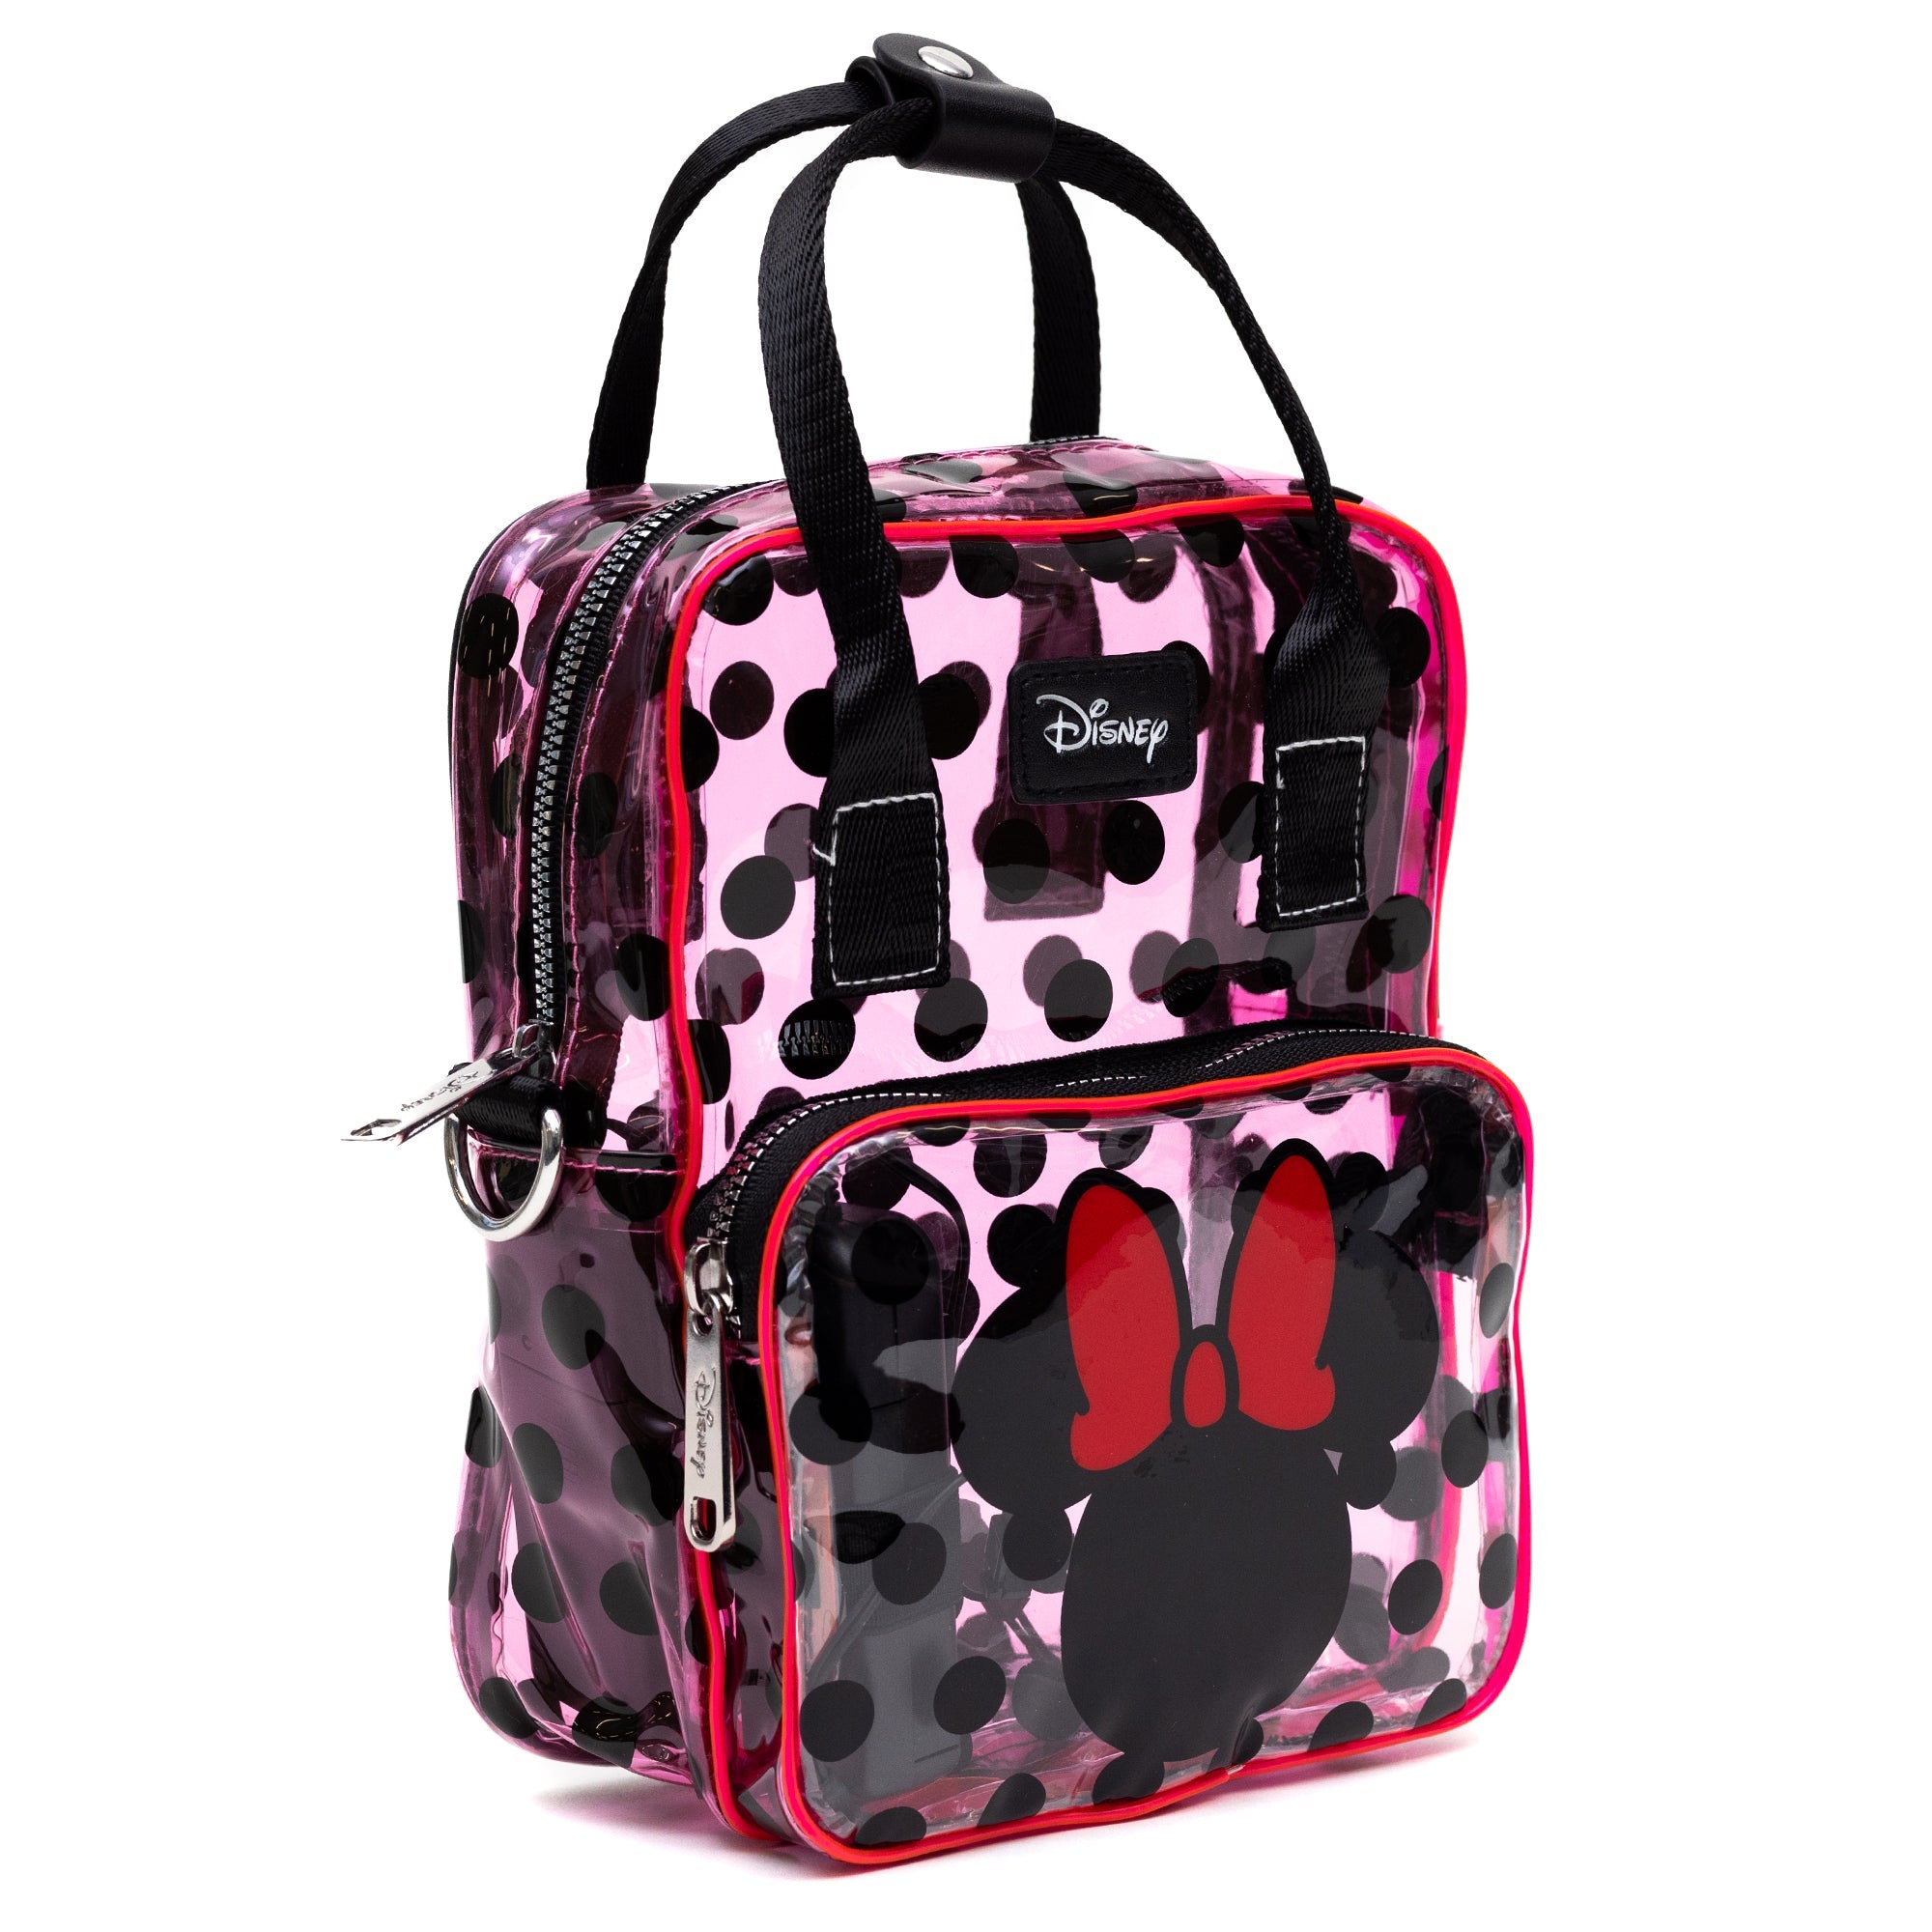 Disney Minnie Mouse Ears and Bow with Polka Dots Light Up PVC Crossbody Bag